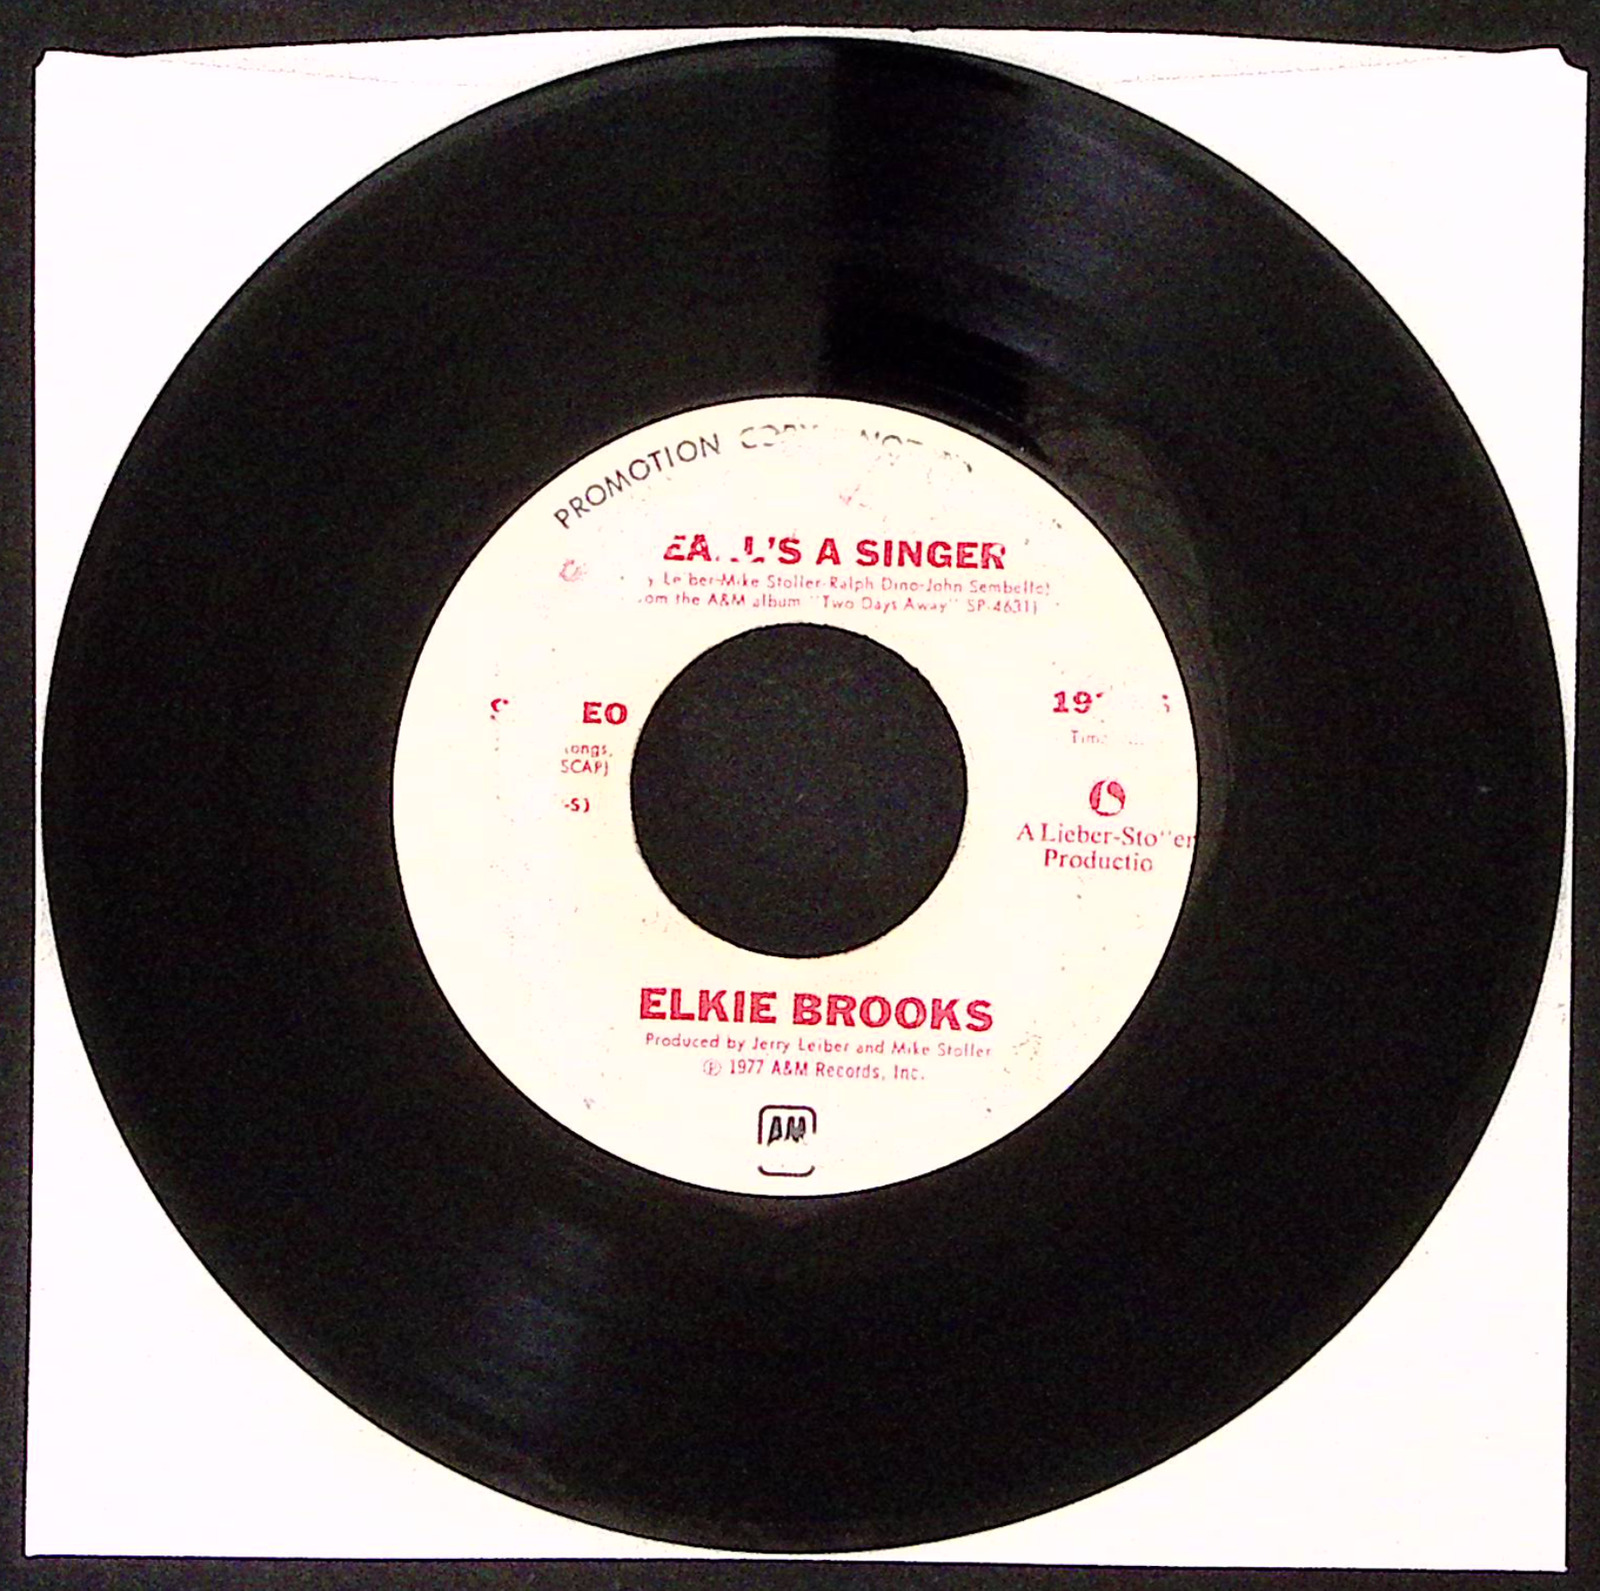 ELKIE BROOKS PEARL\'S A SINGER A&M RECORDS PROMO VINYL 45 VG 41-128